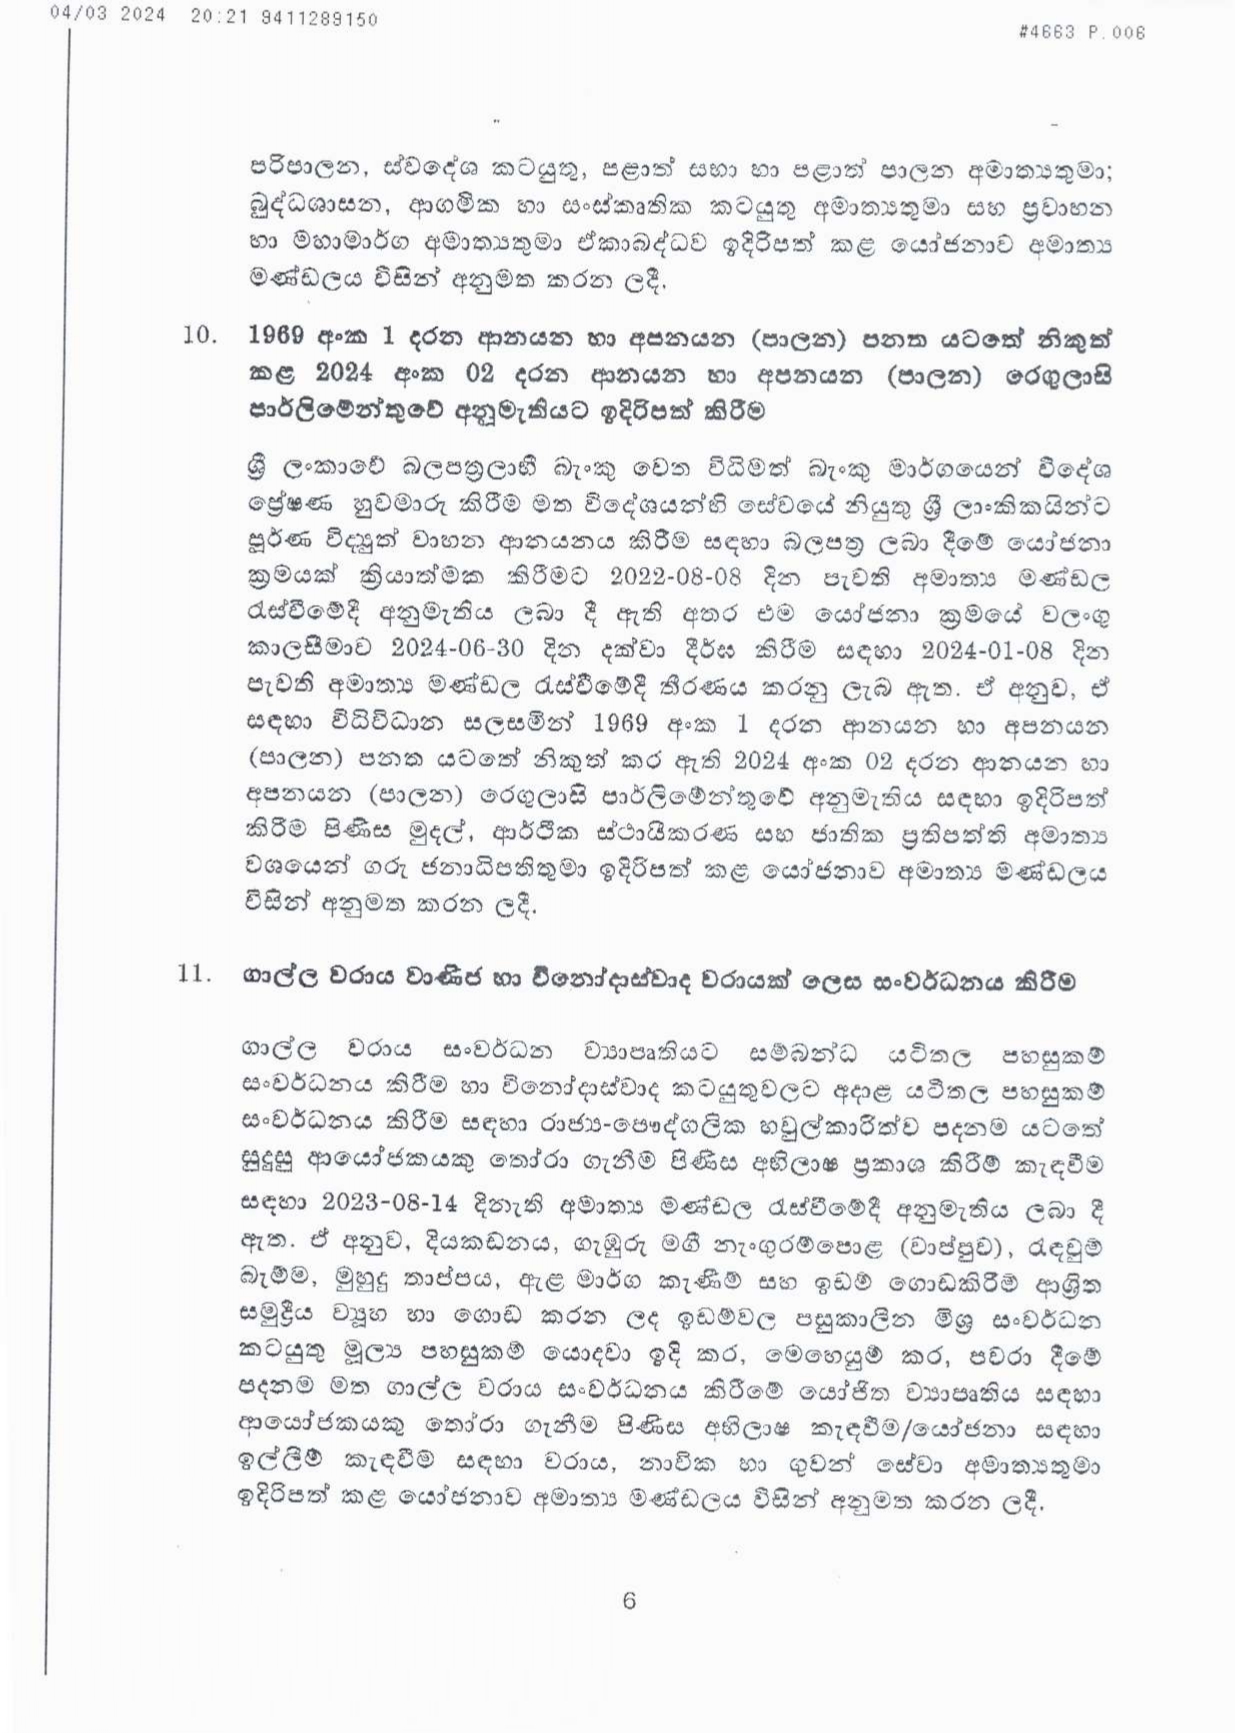 Cabinet Decision on 04.03.2024 page 0006